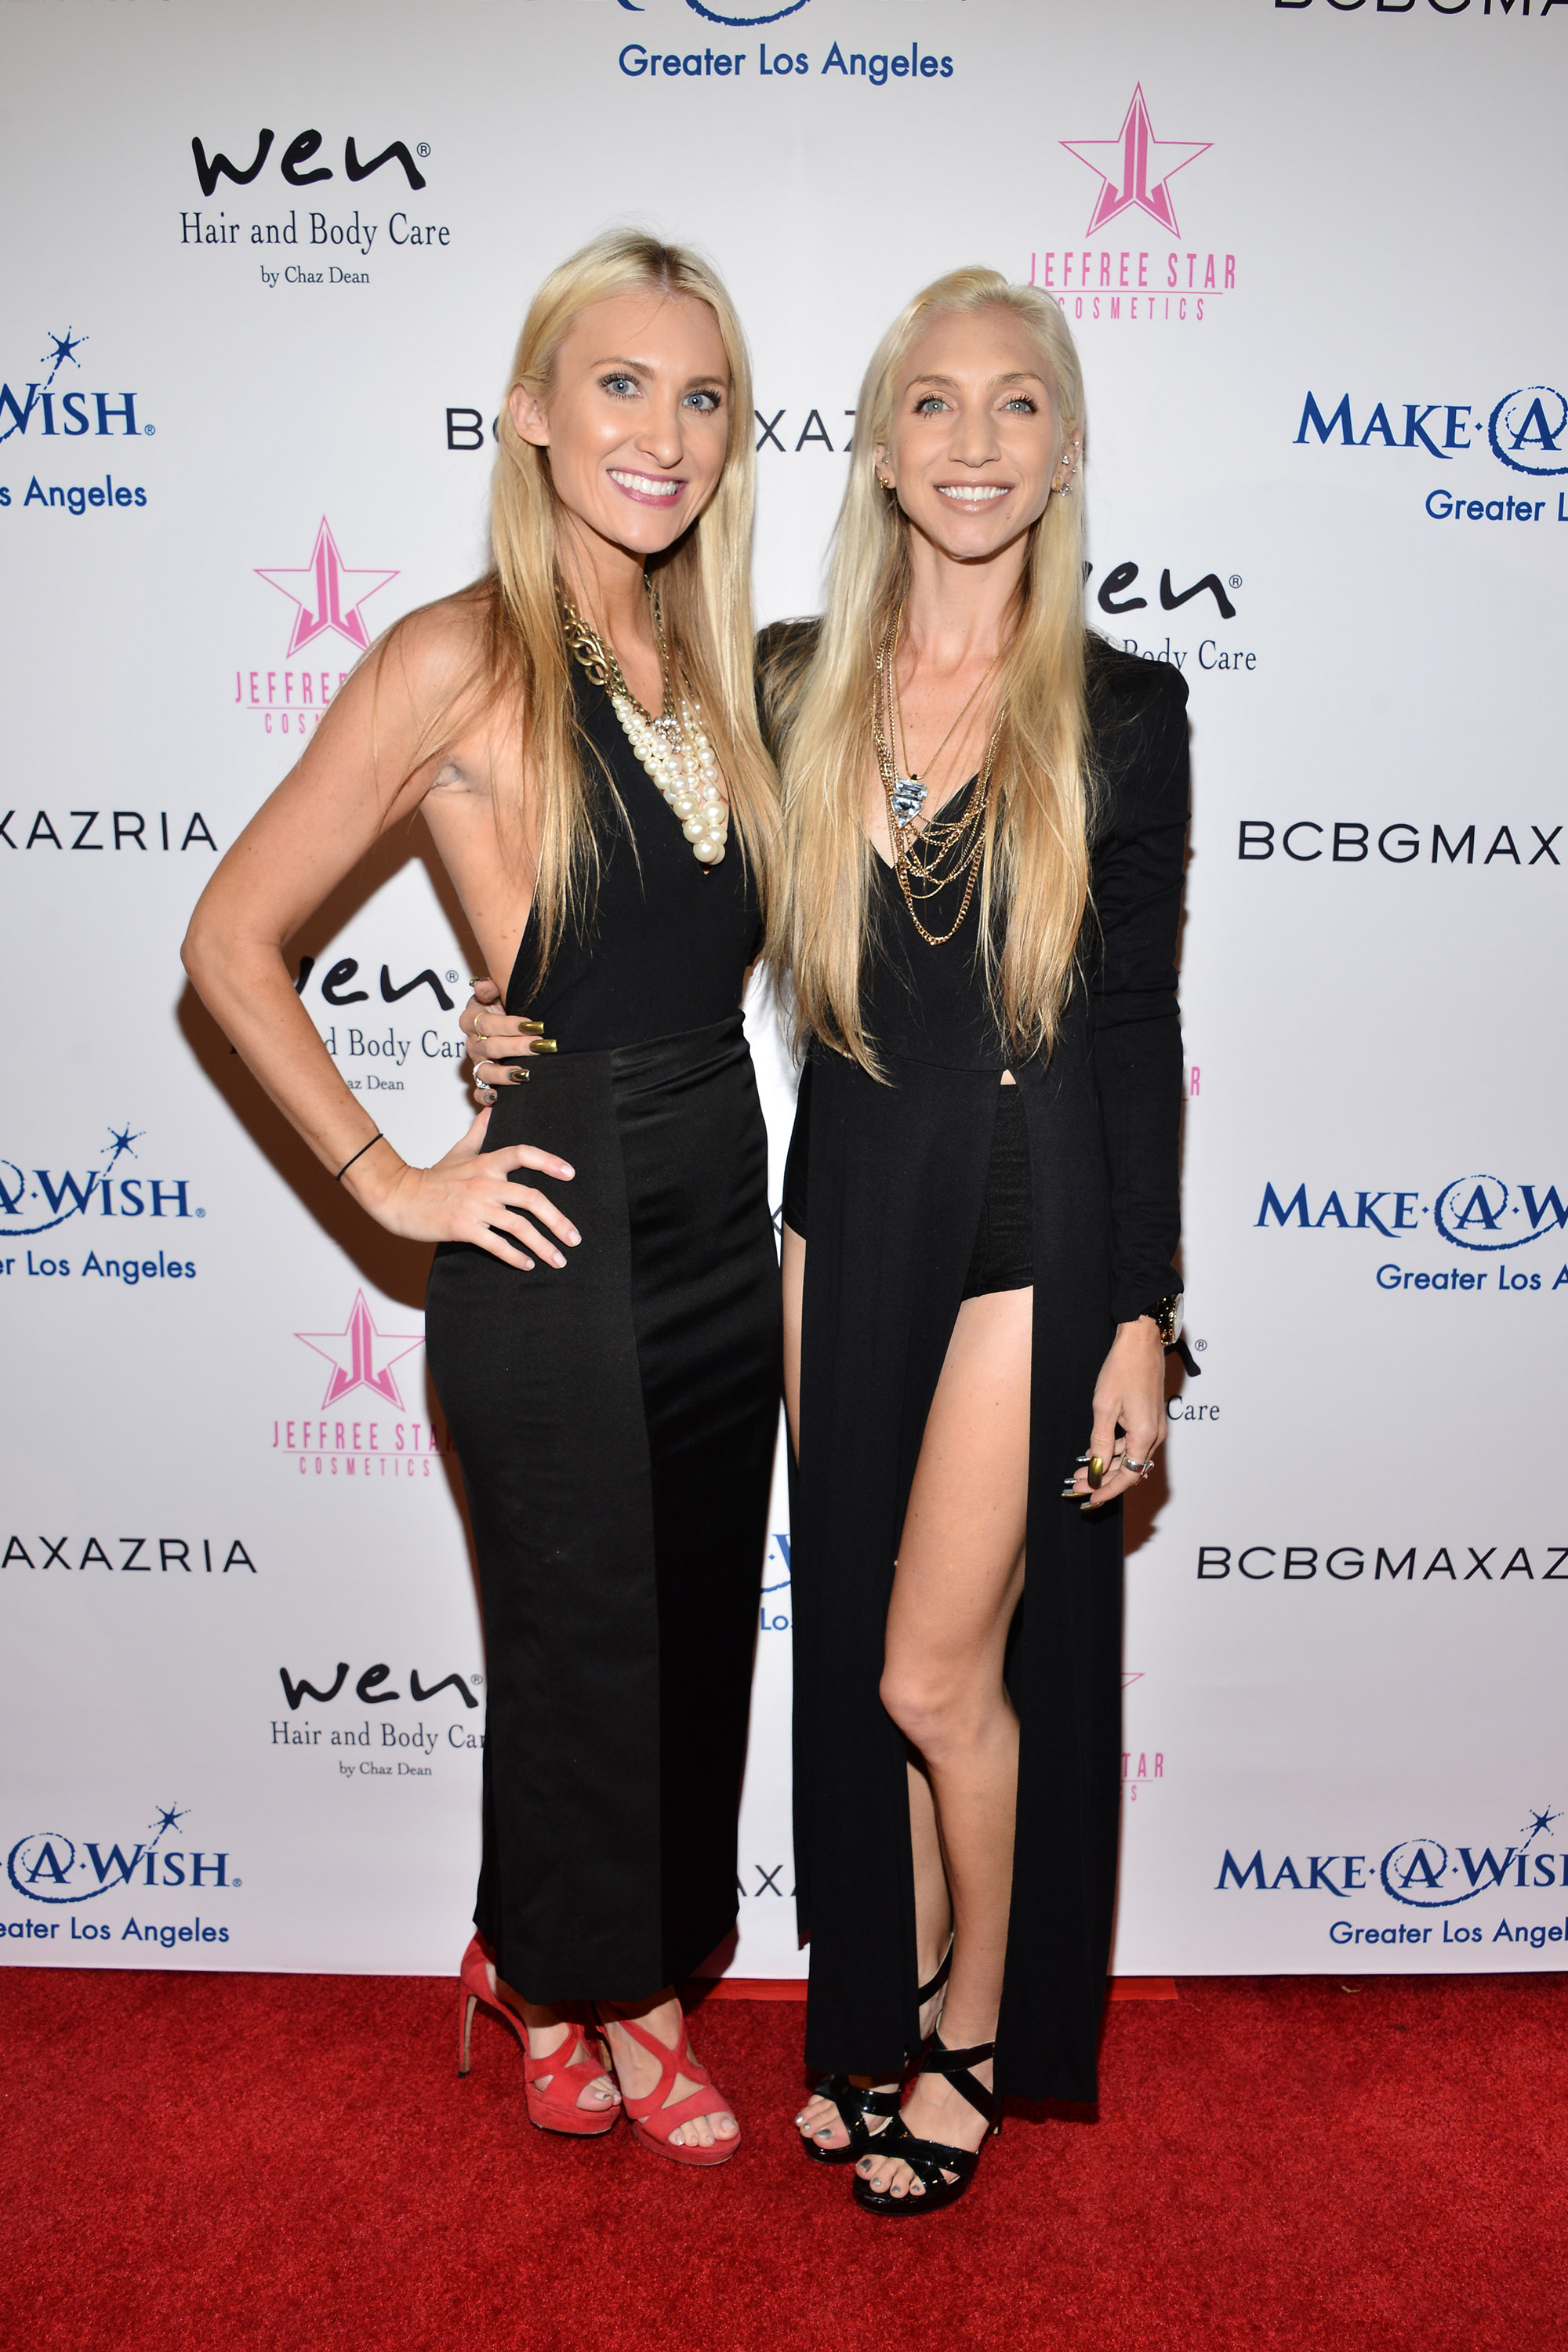 LOS ANGELES, CA - AUGUST 24: Erin Whitaker and Sarah Whitaker attend the Inaugural Fashion Show Benefiting Make-A-Wish with BCBGMAXAZRIA and Celebrity Host Brad Goreski at The Taglyan Complex on August 24, 2016 in Los Angeles, California. (Photo by Araya Diaz/WireImage)